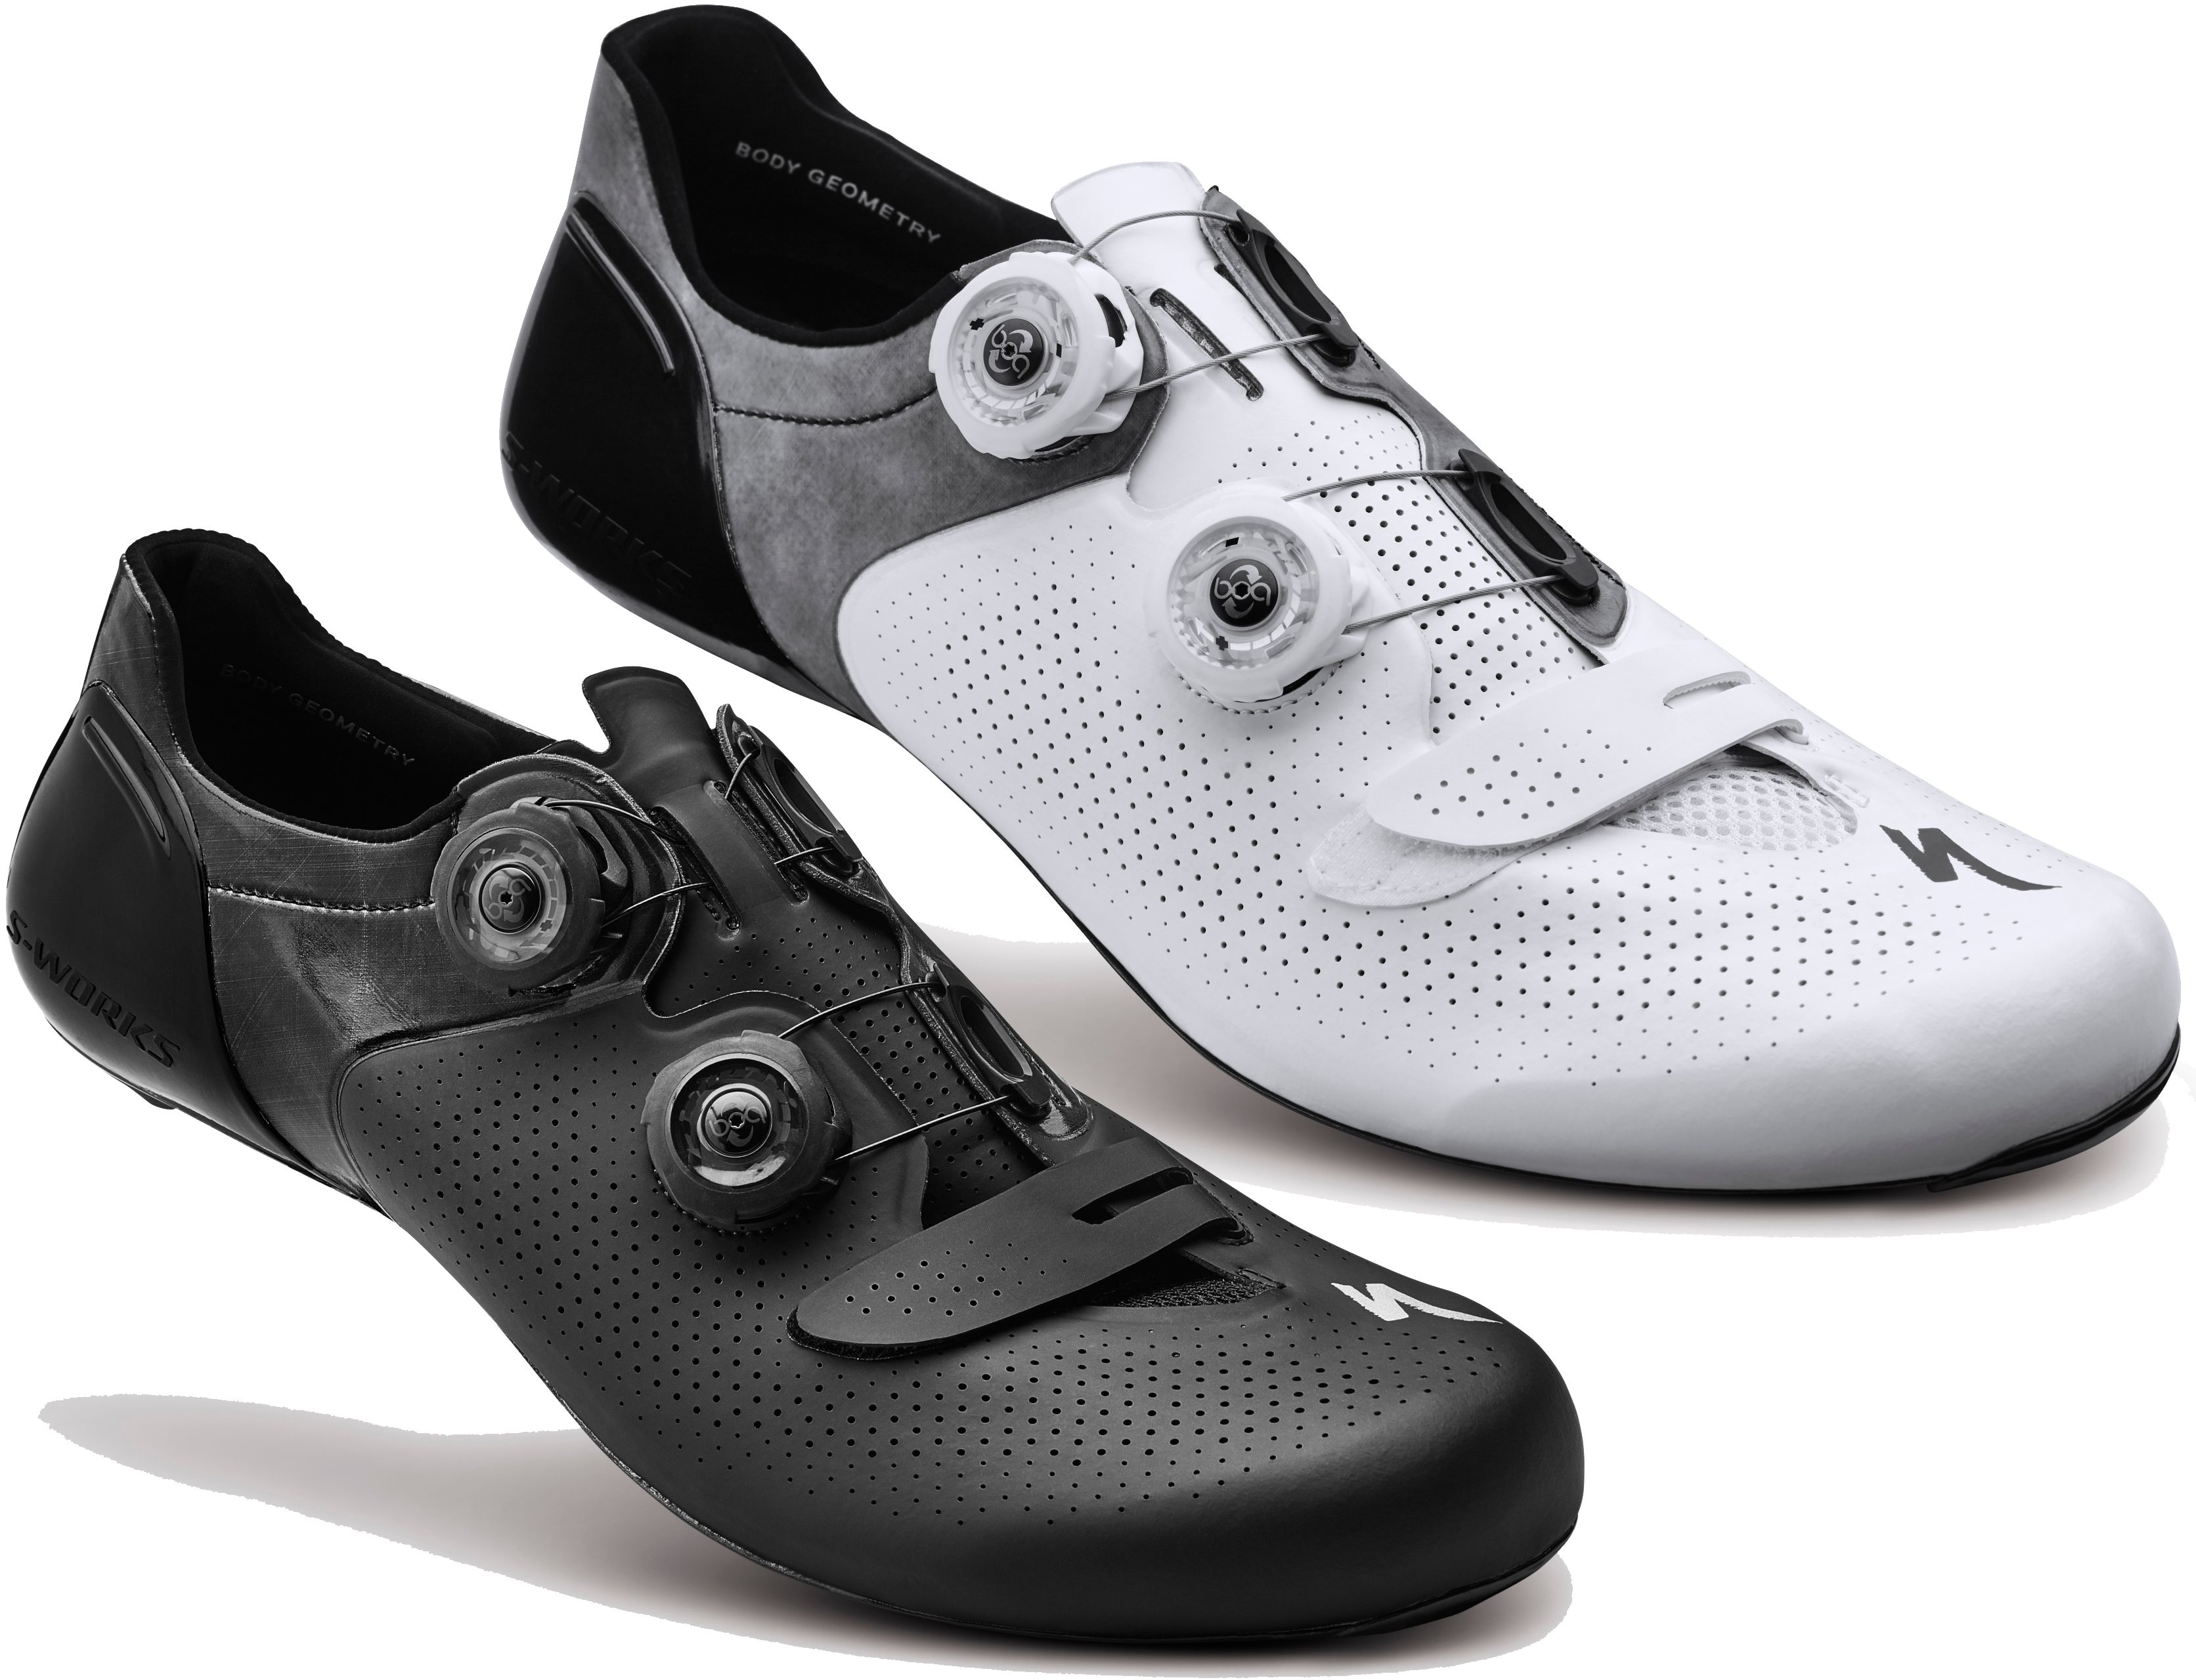 Specialized S-WORKS 6 Road Shoe - £ | Shoes - Road Cycling |  Cyclestore